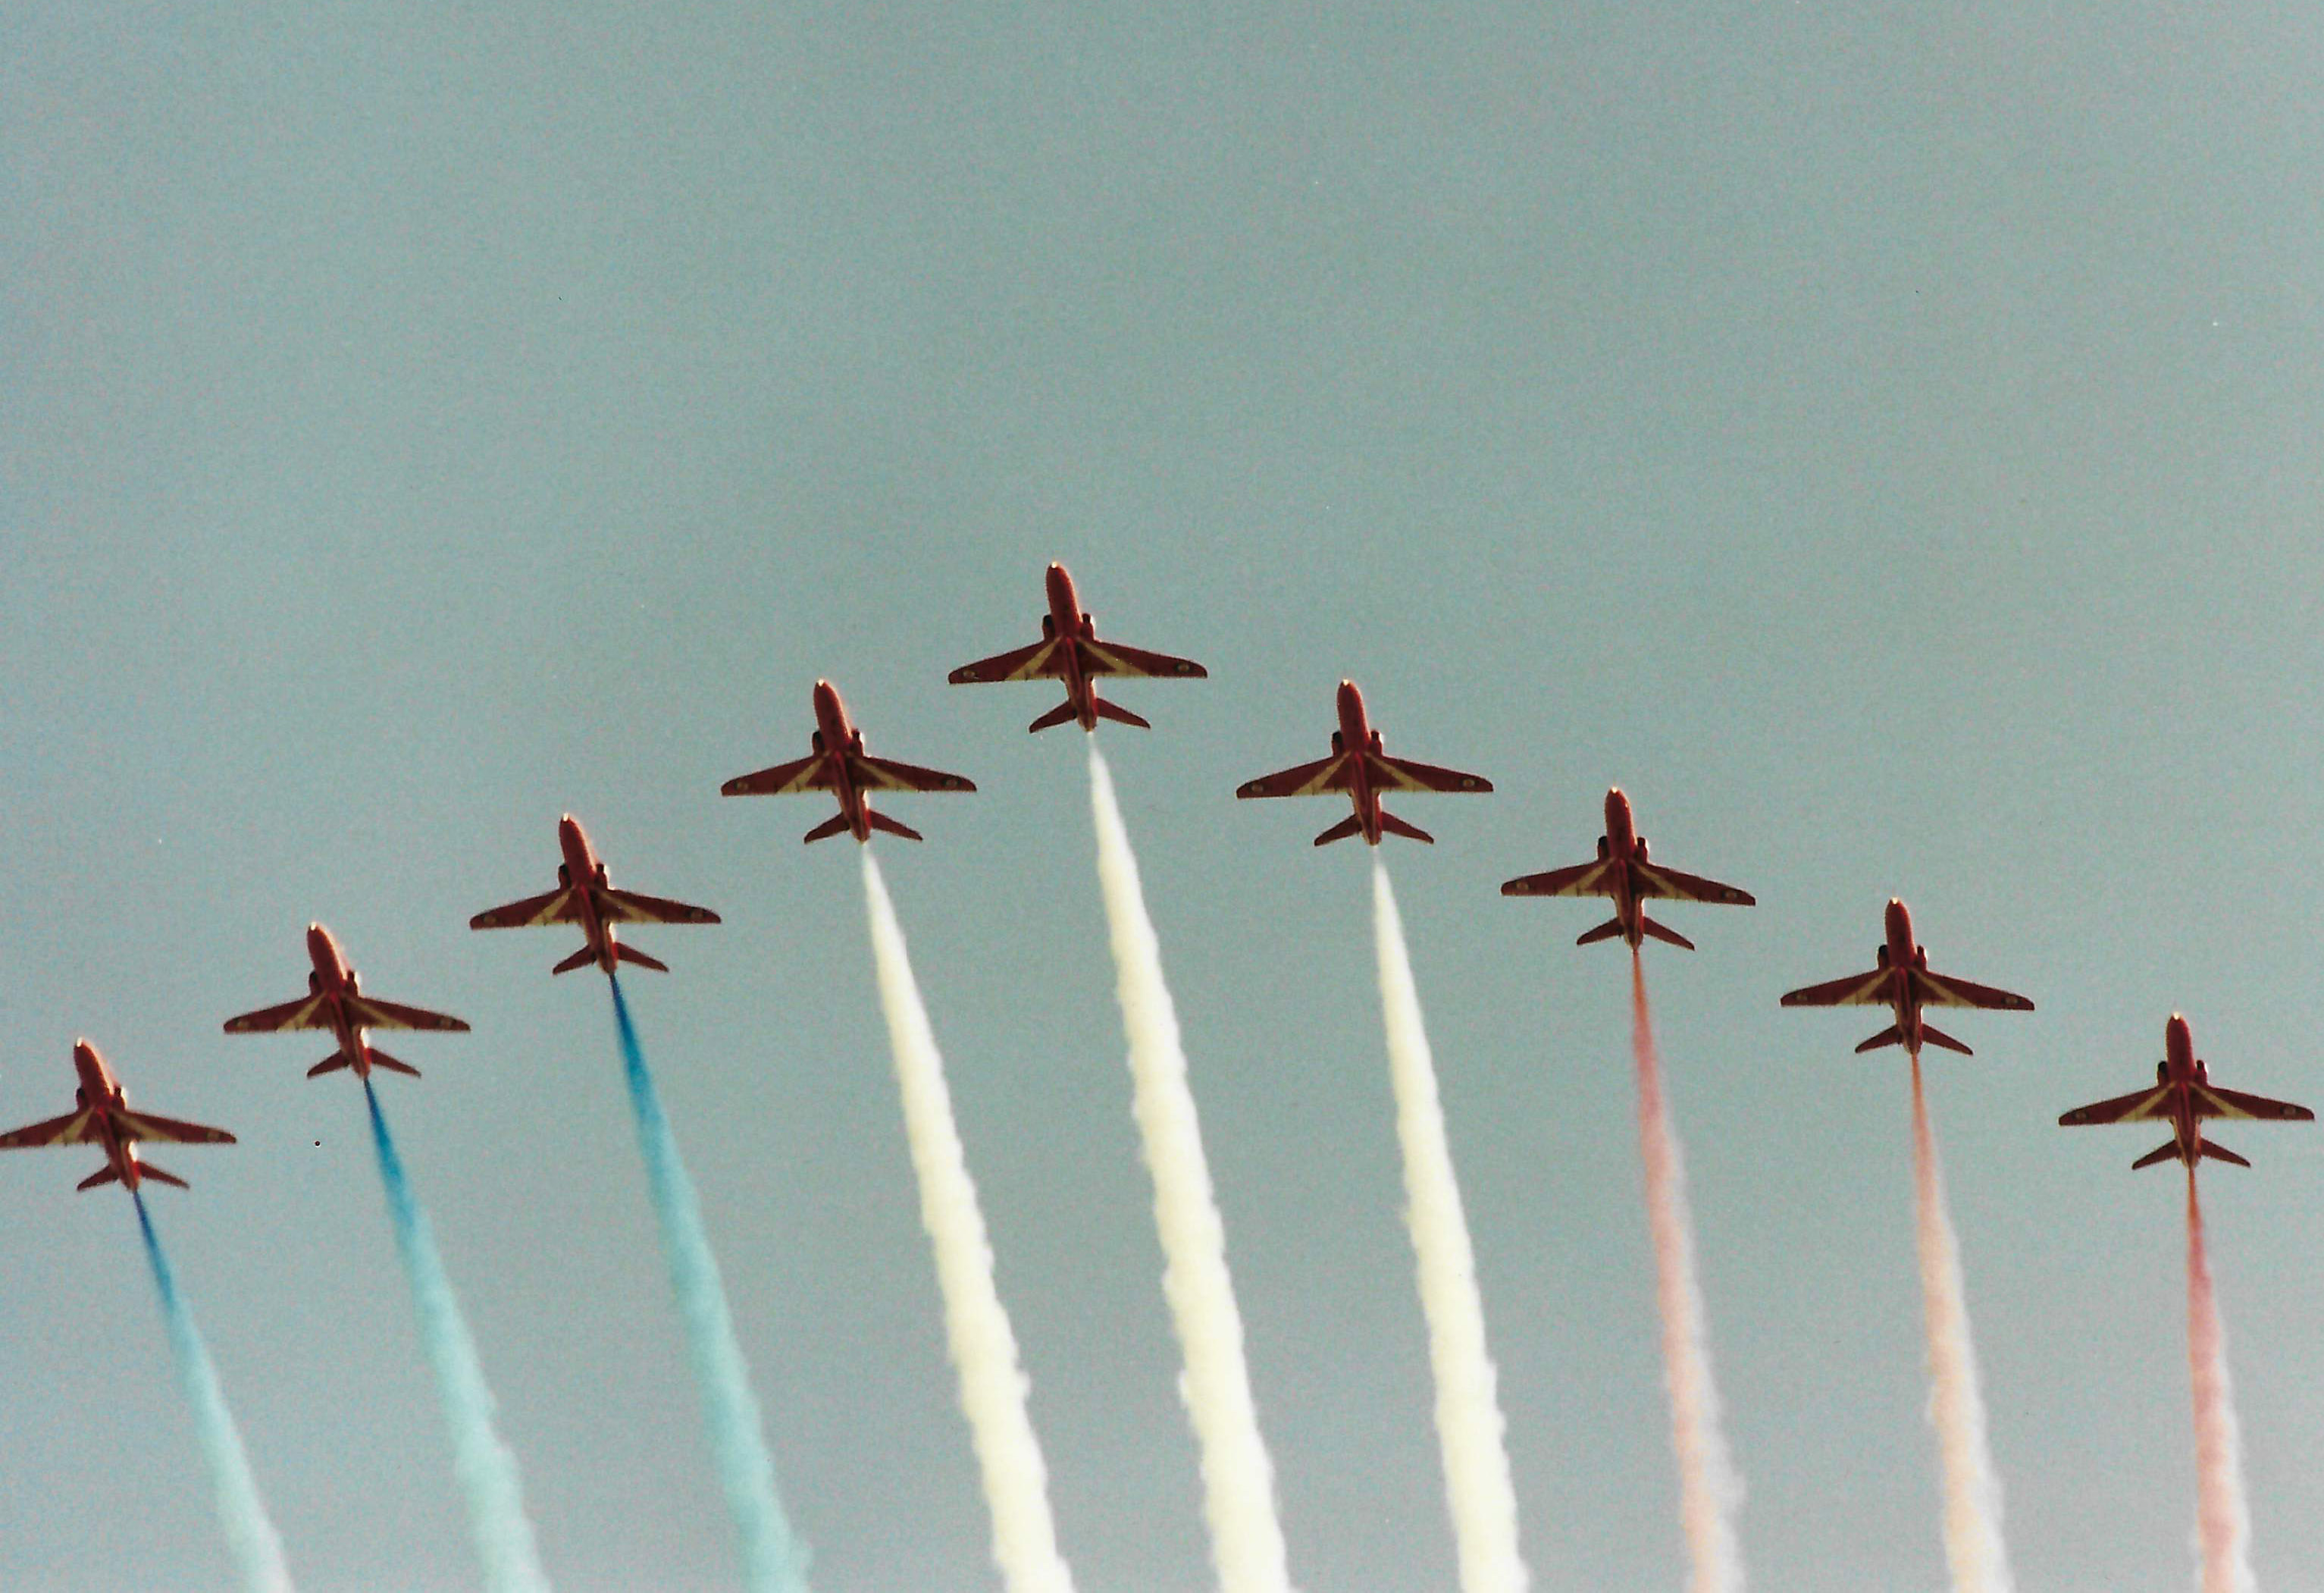 Red Arrows - still flying the Folland Gnat in those days